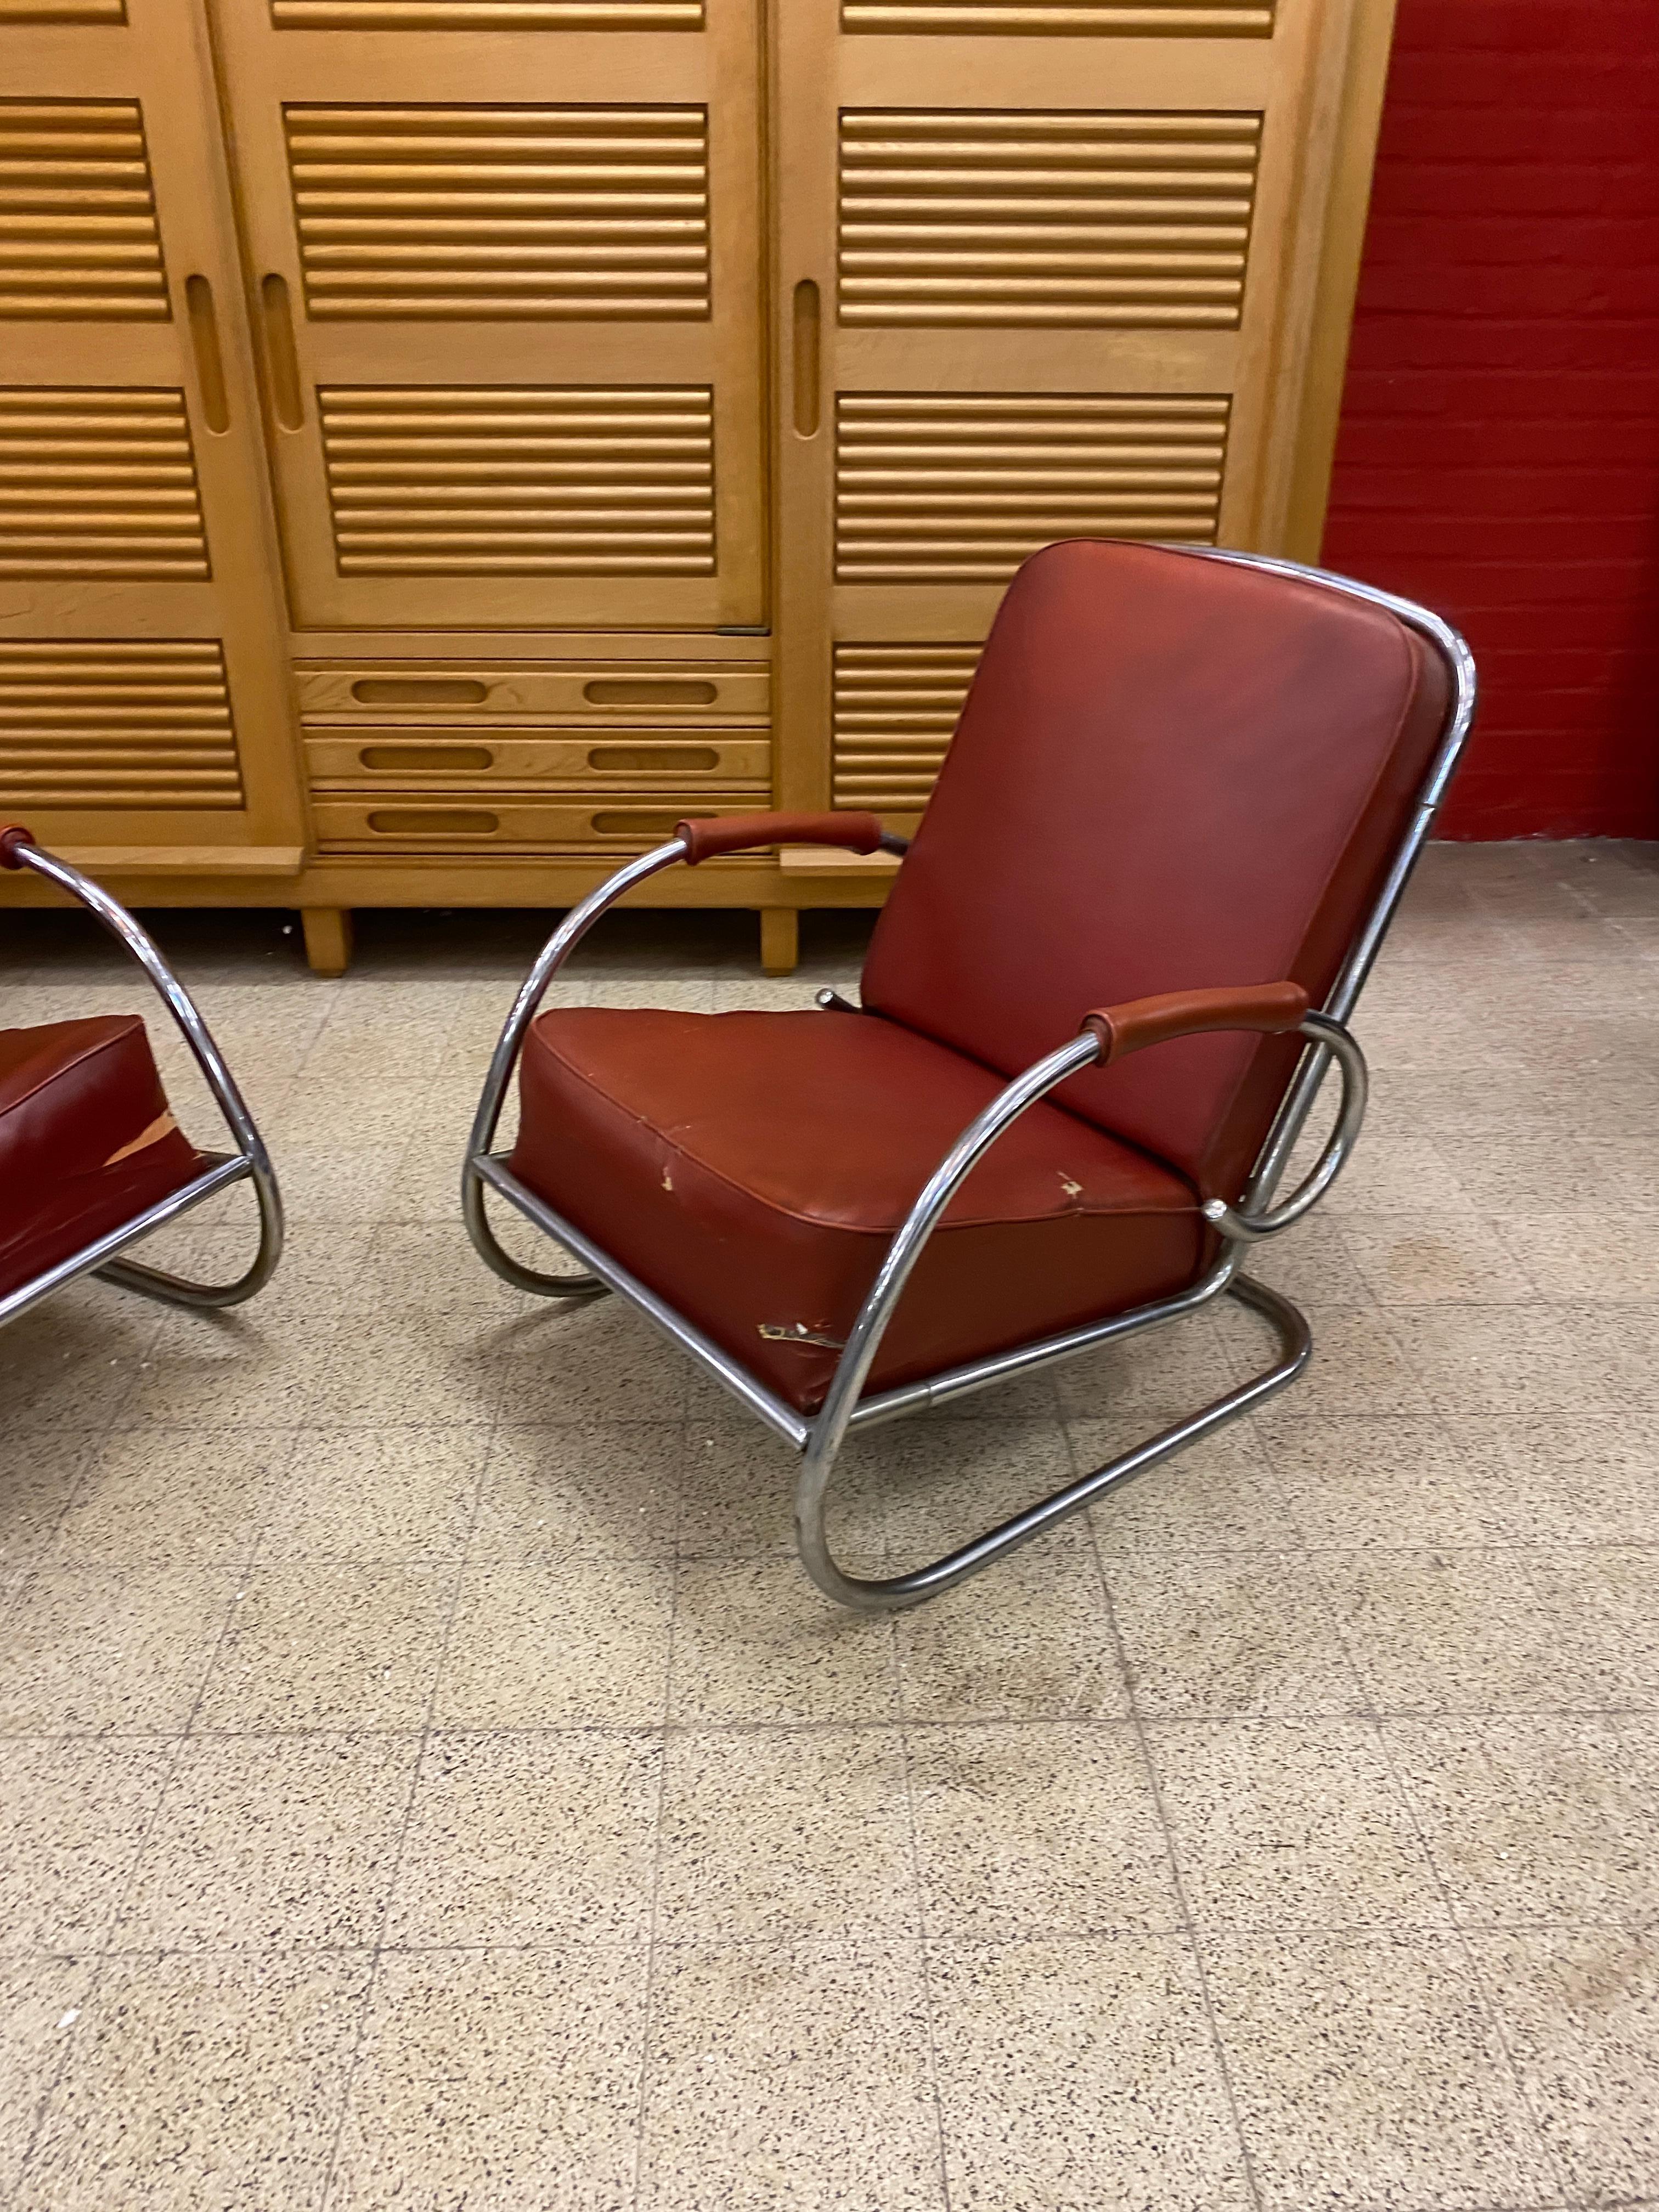 European 2 Modernist Art Deco Armchairs in Chromed Metal and Faux Leather circa 1920-1930 For Sale